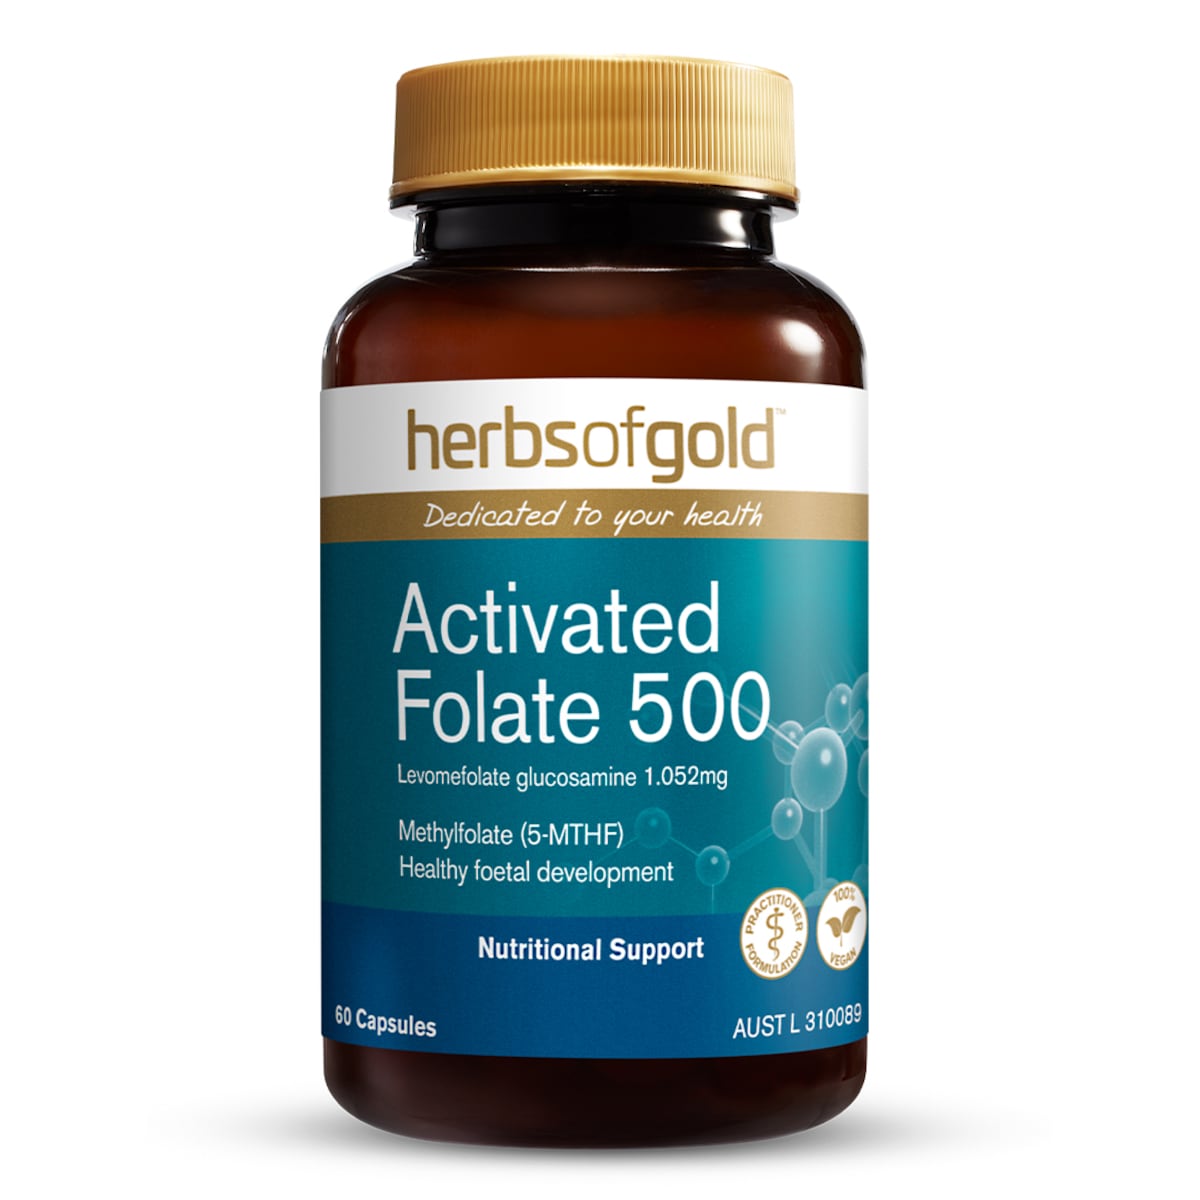 Herbs of Gold Activated Folate 500 60 Capsules Australia